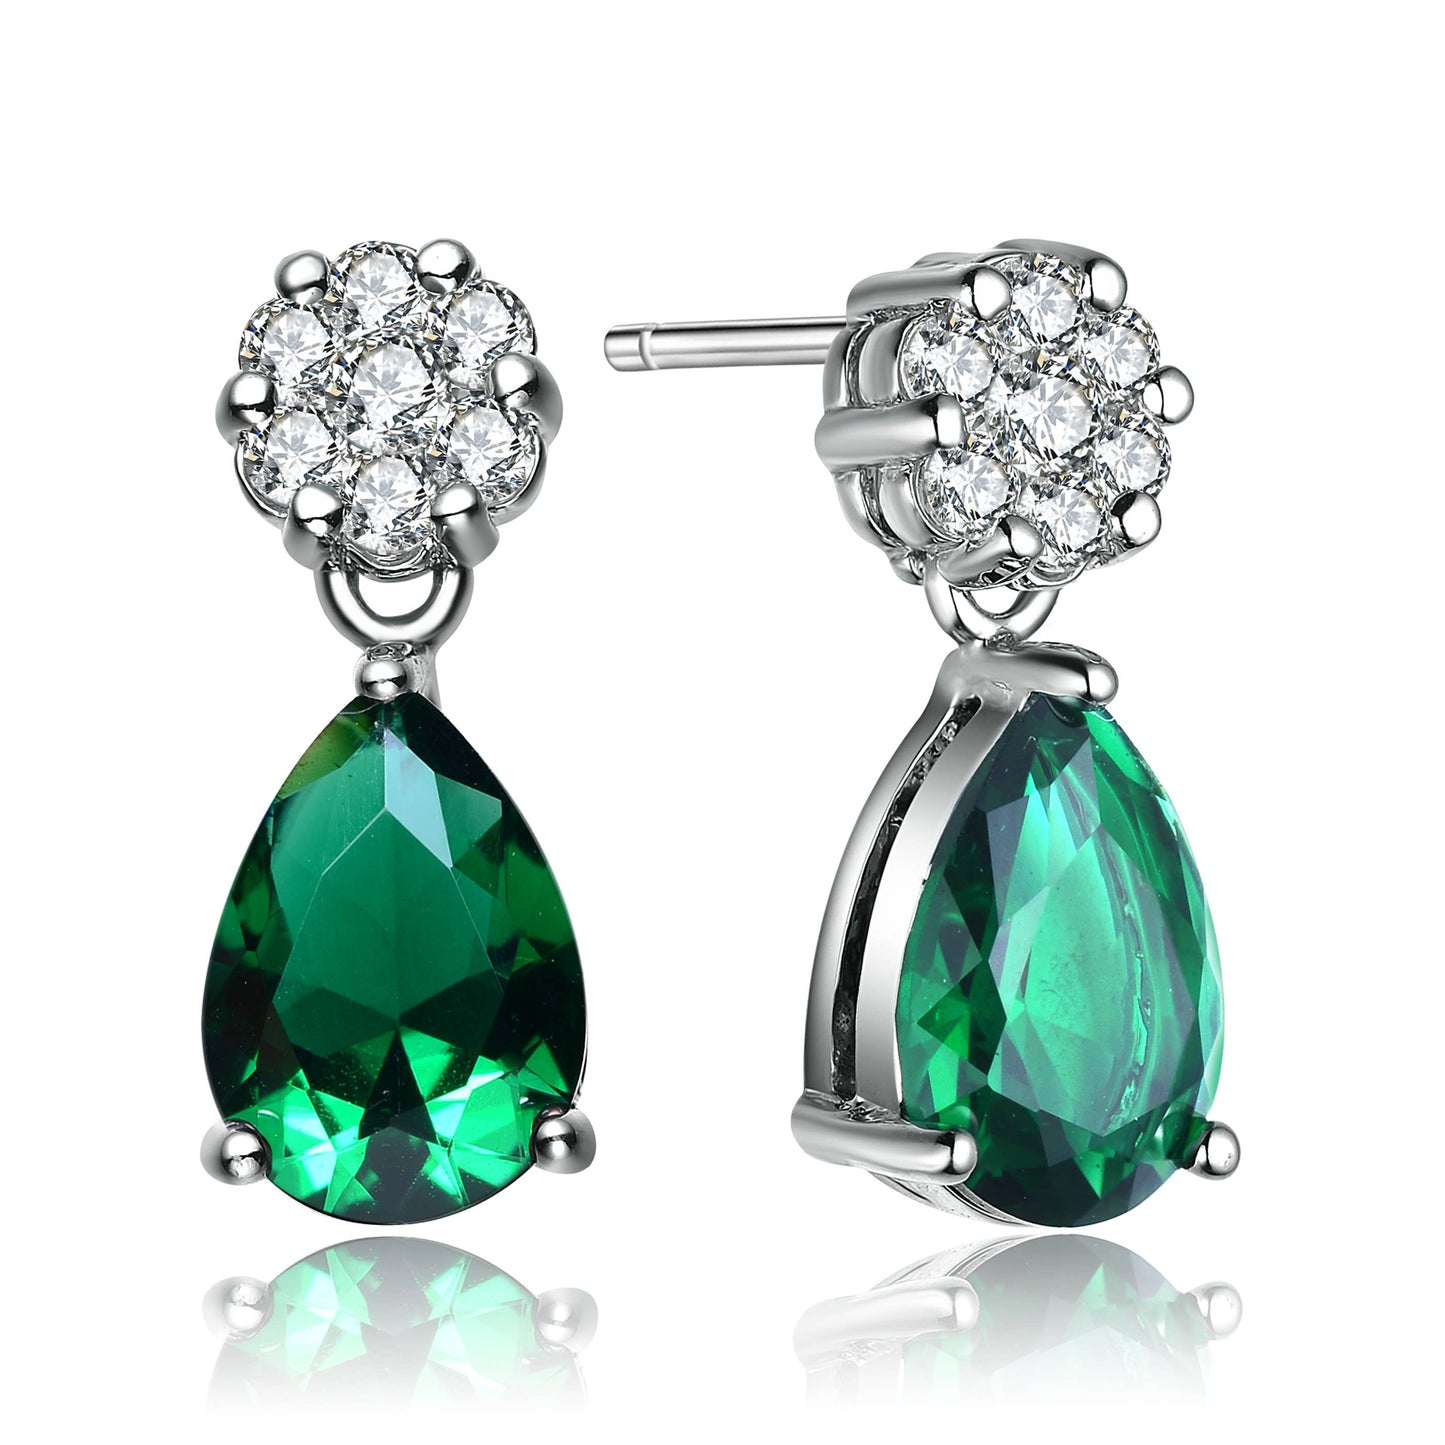 Sterling Silver with Green Cubic Zirconia Earrings